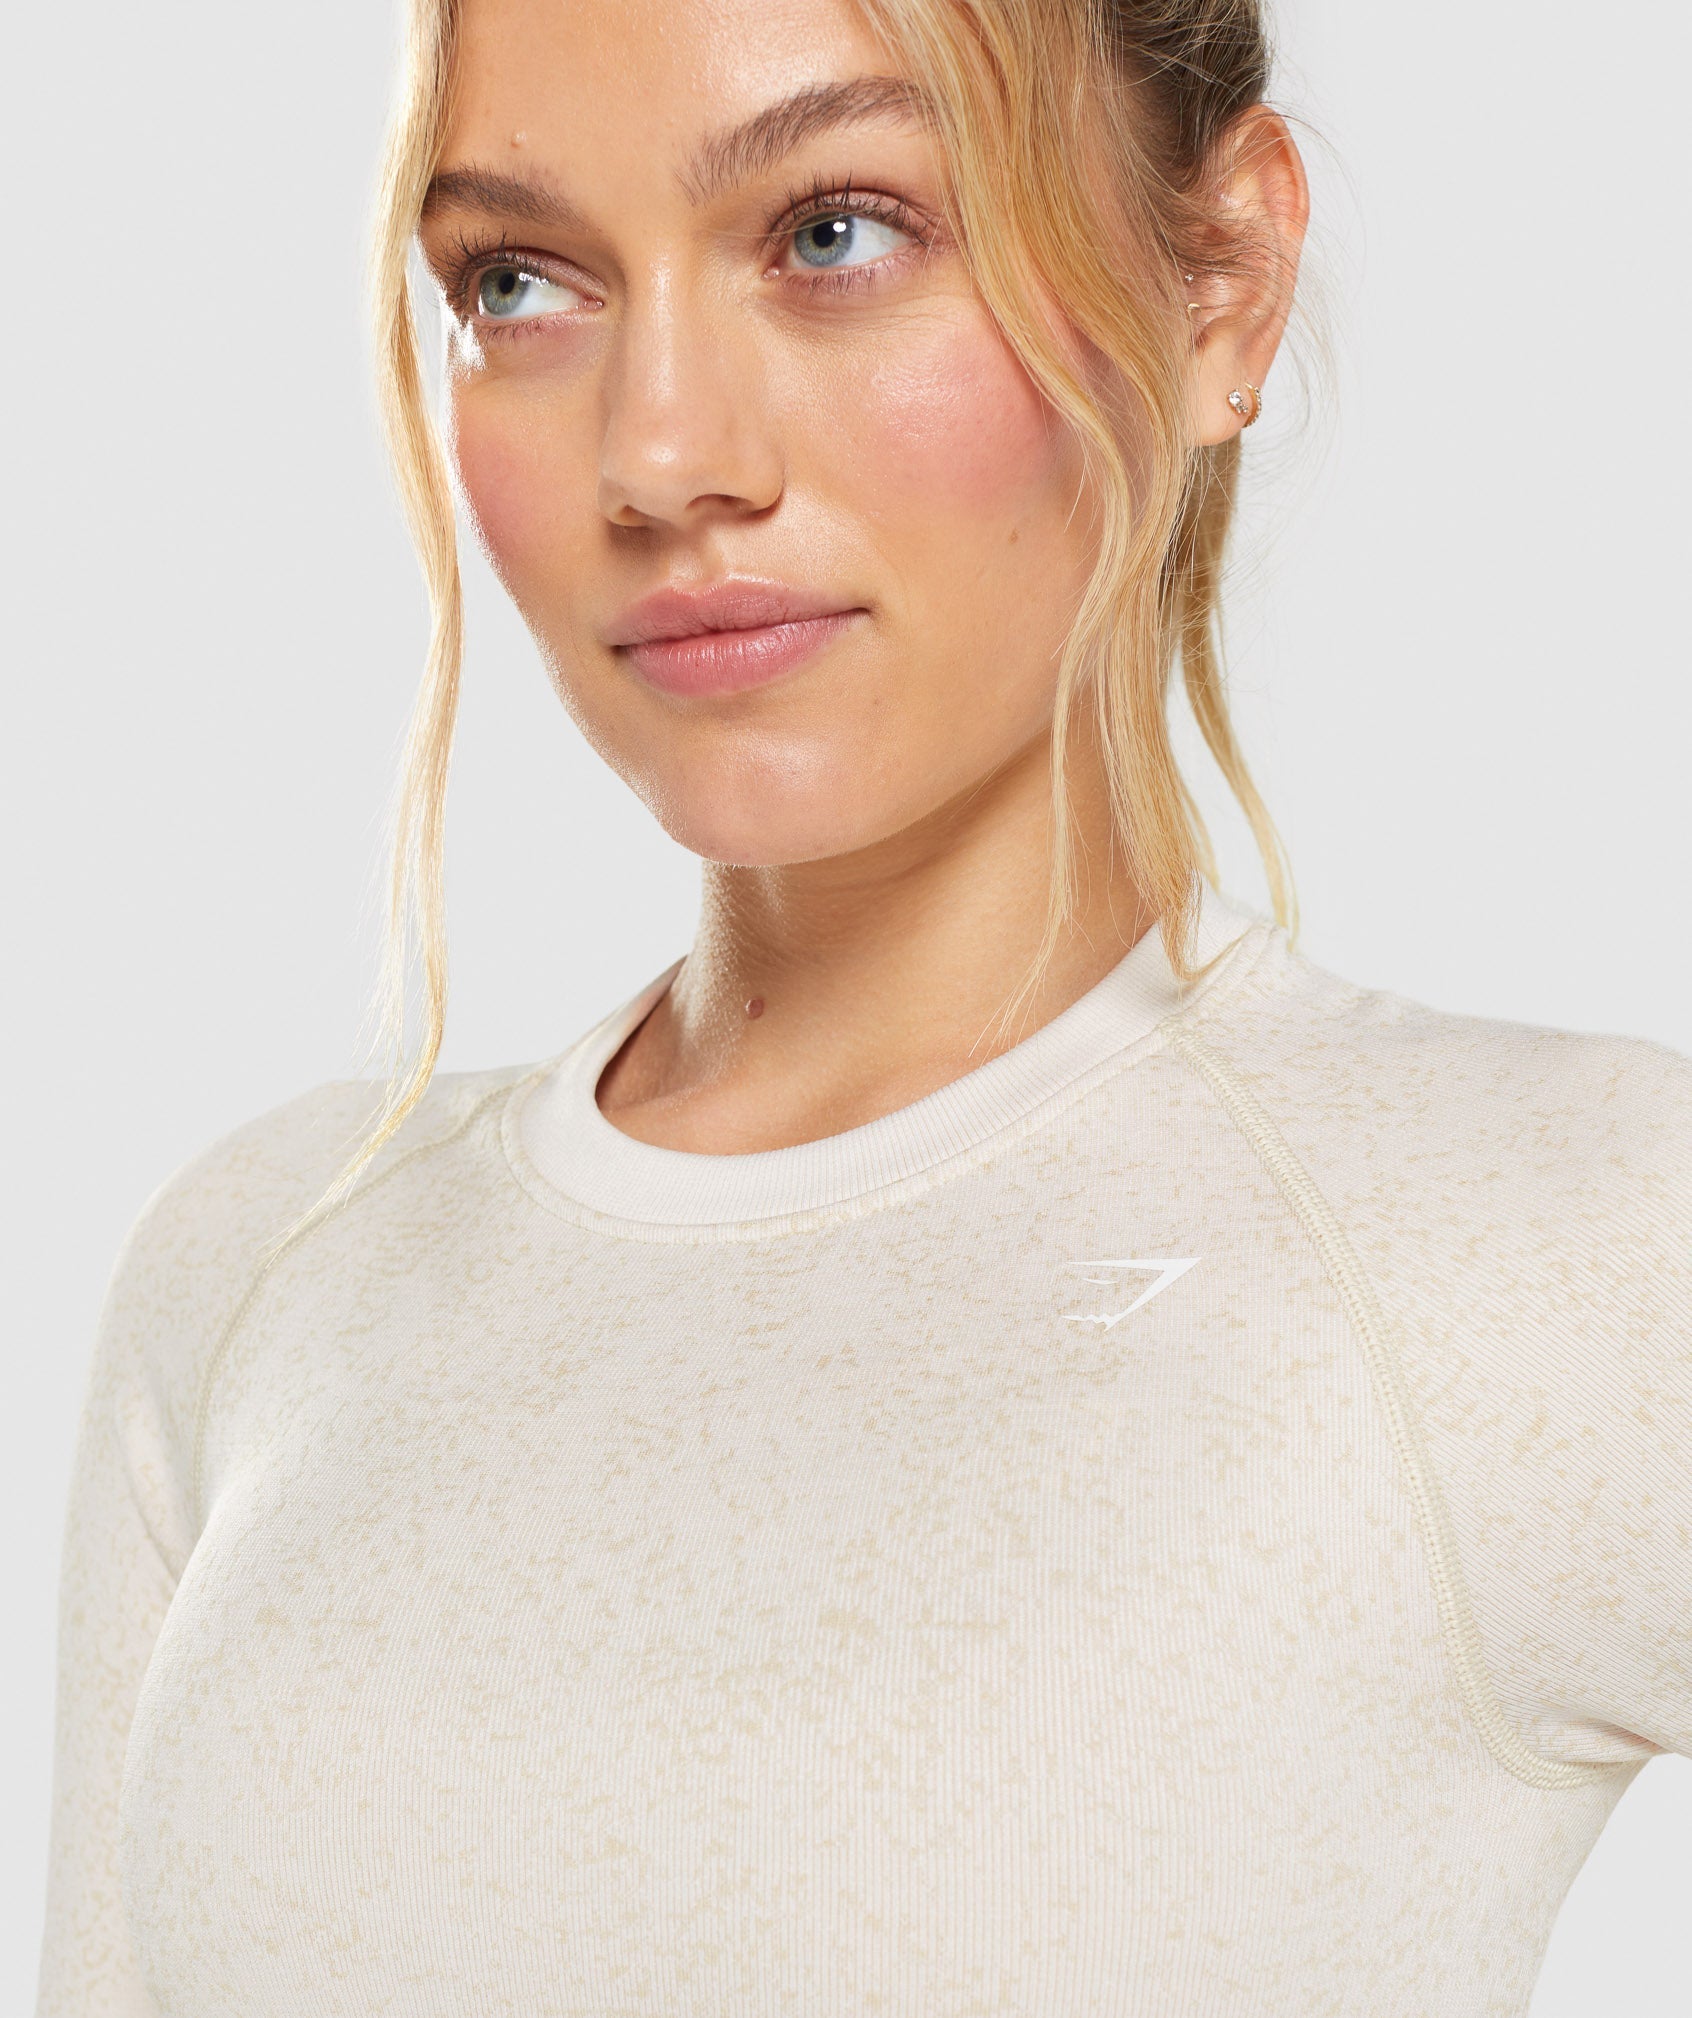 Adapt Fleck Seamless Long Sleeve Crop Top in Coconut White - view 6